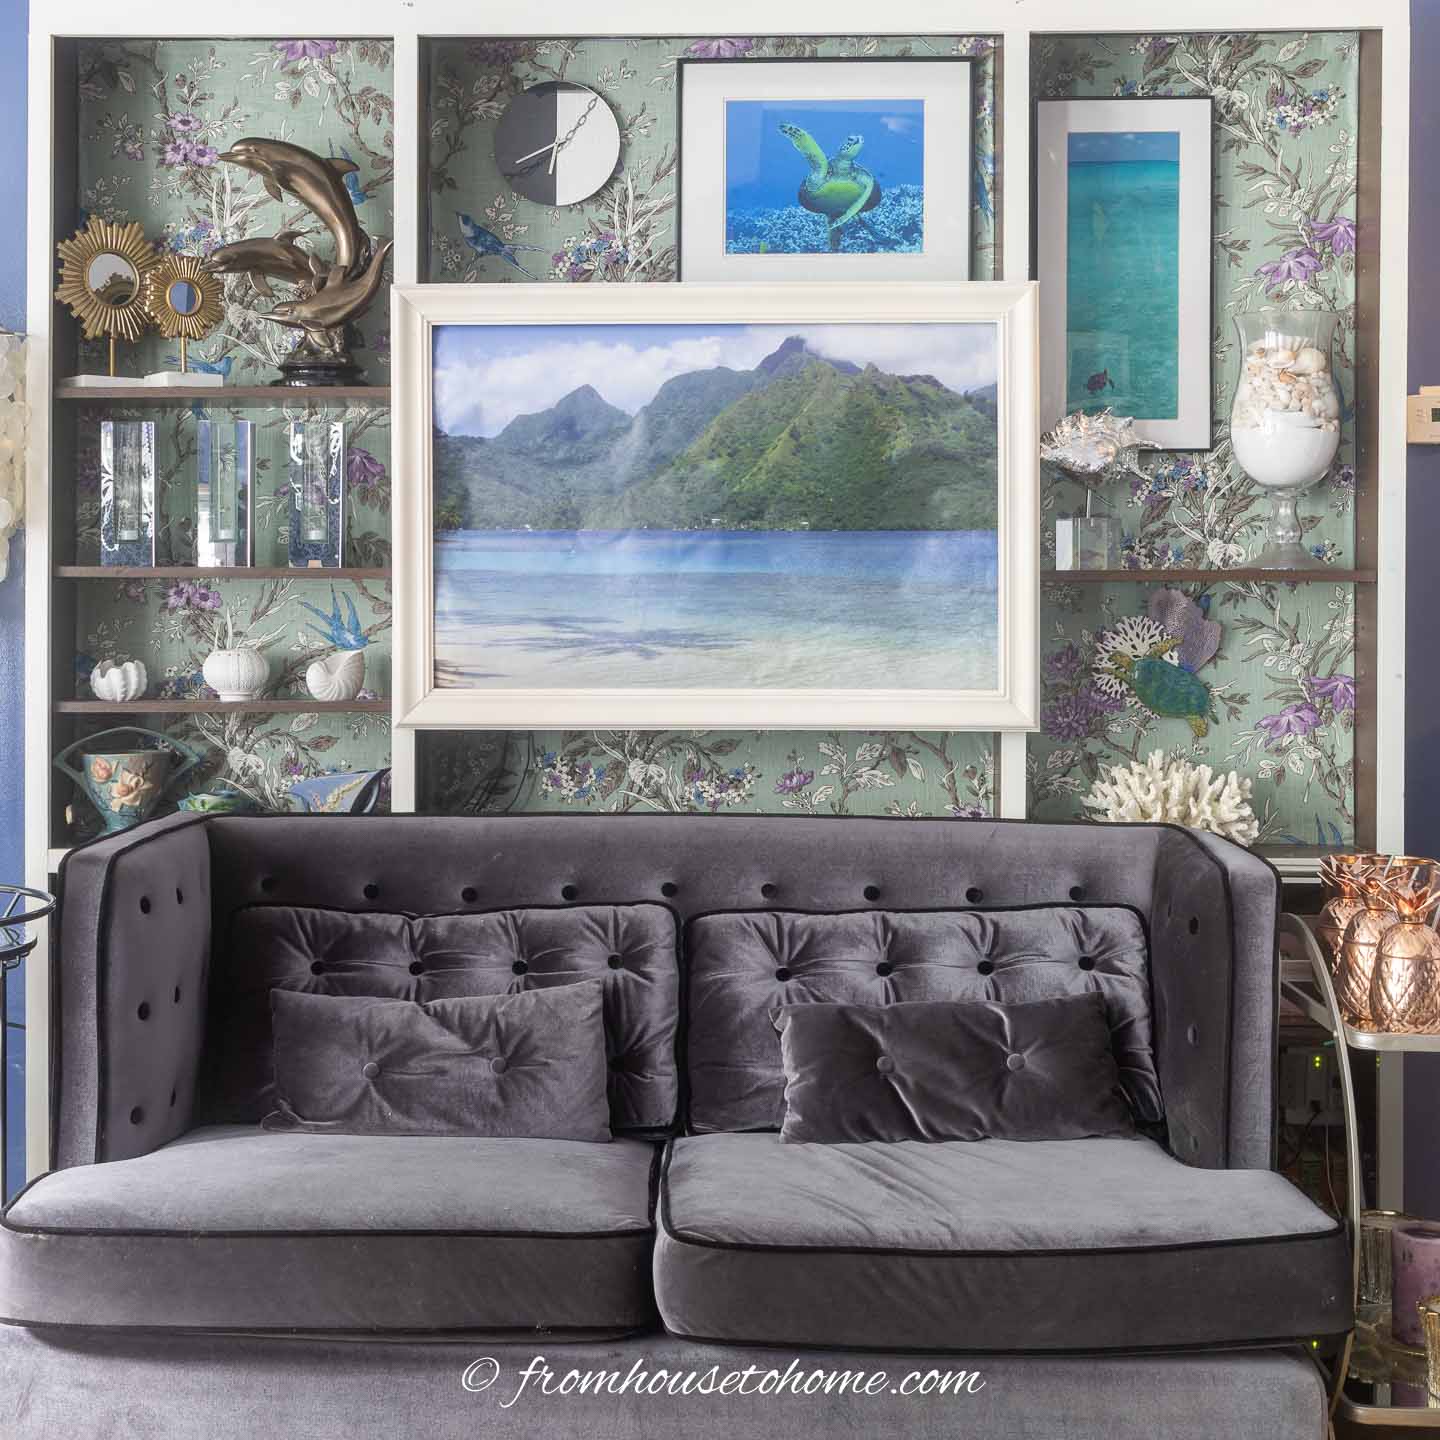 Living room wall with large DIY printed pictures